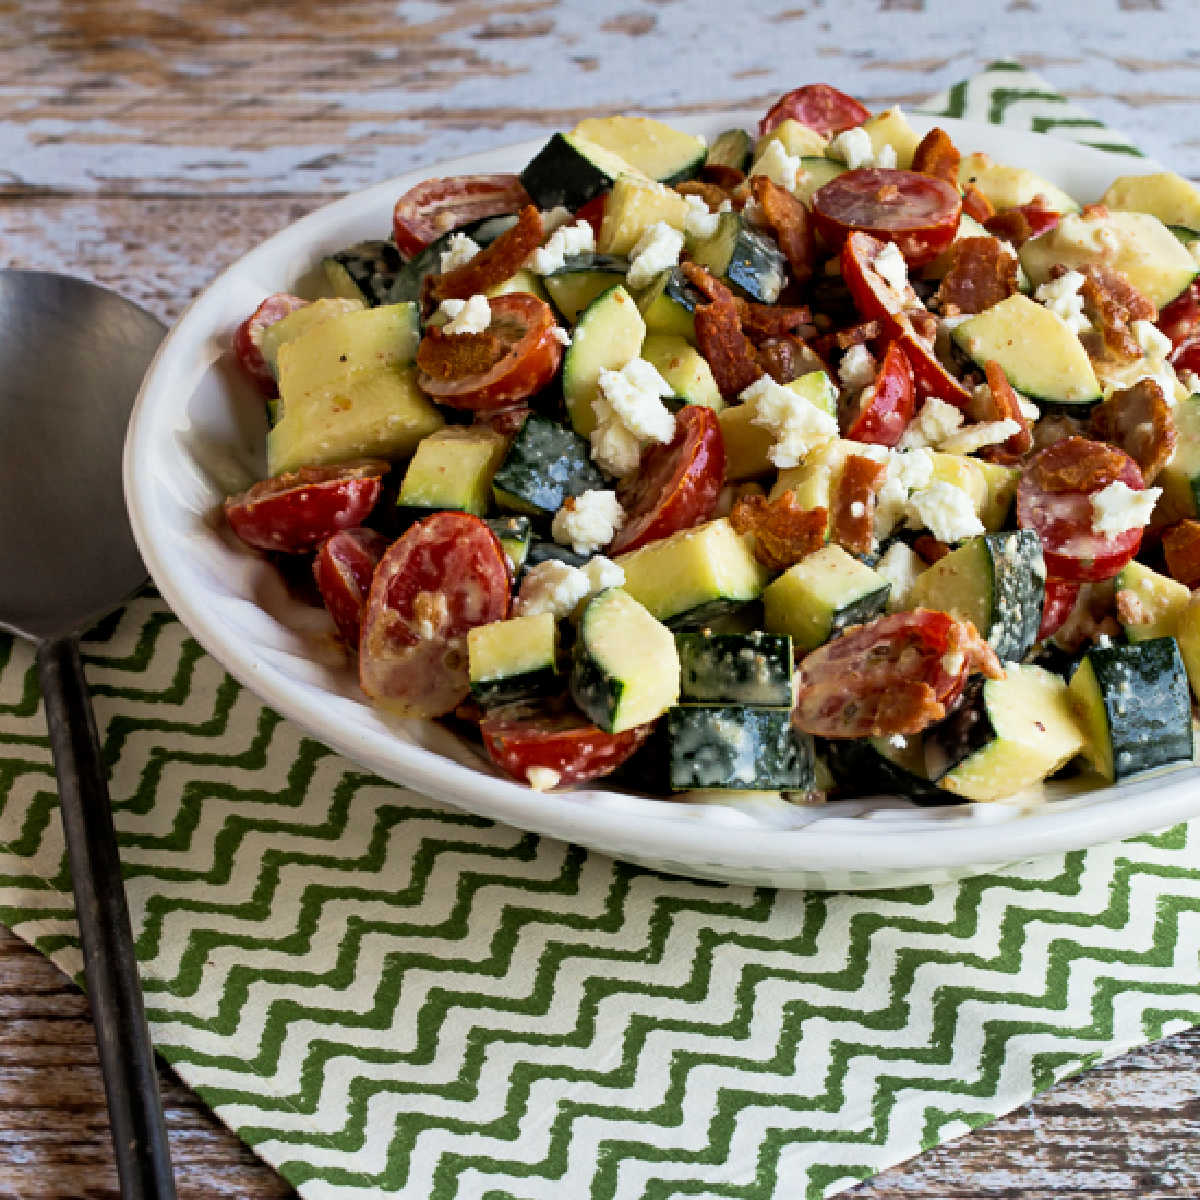 Raw Zucchini Salad with Bacon, Tomato, and Feta shown in serving bowl on napkin.